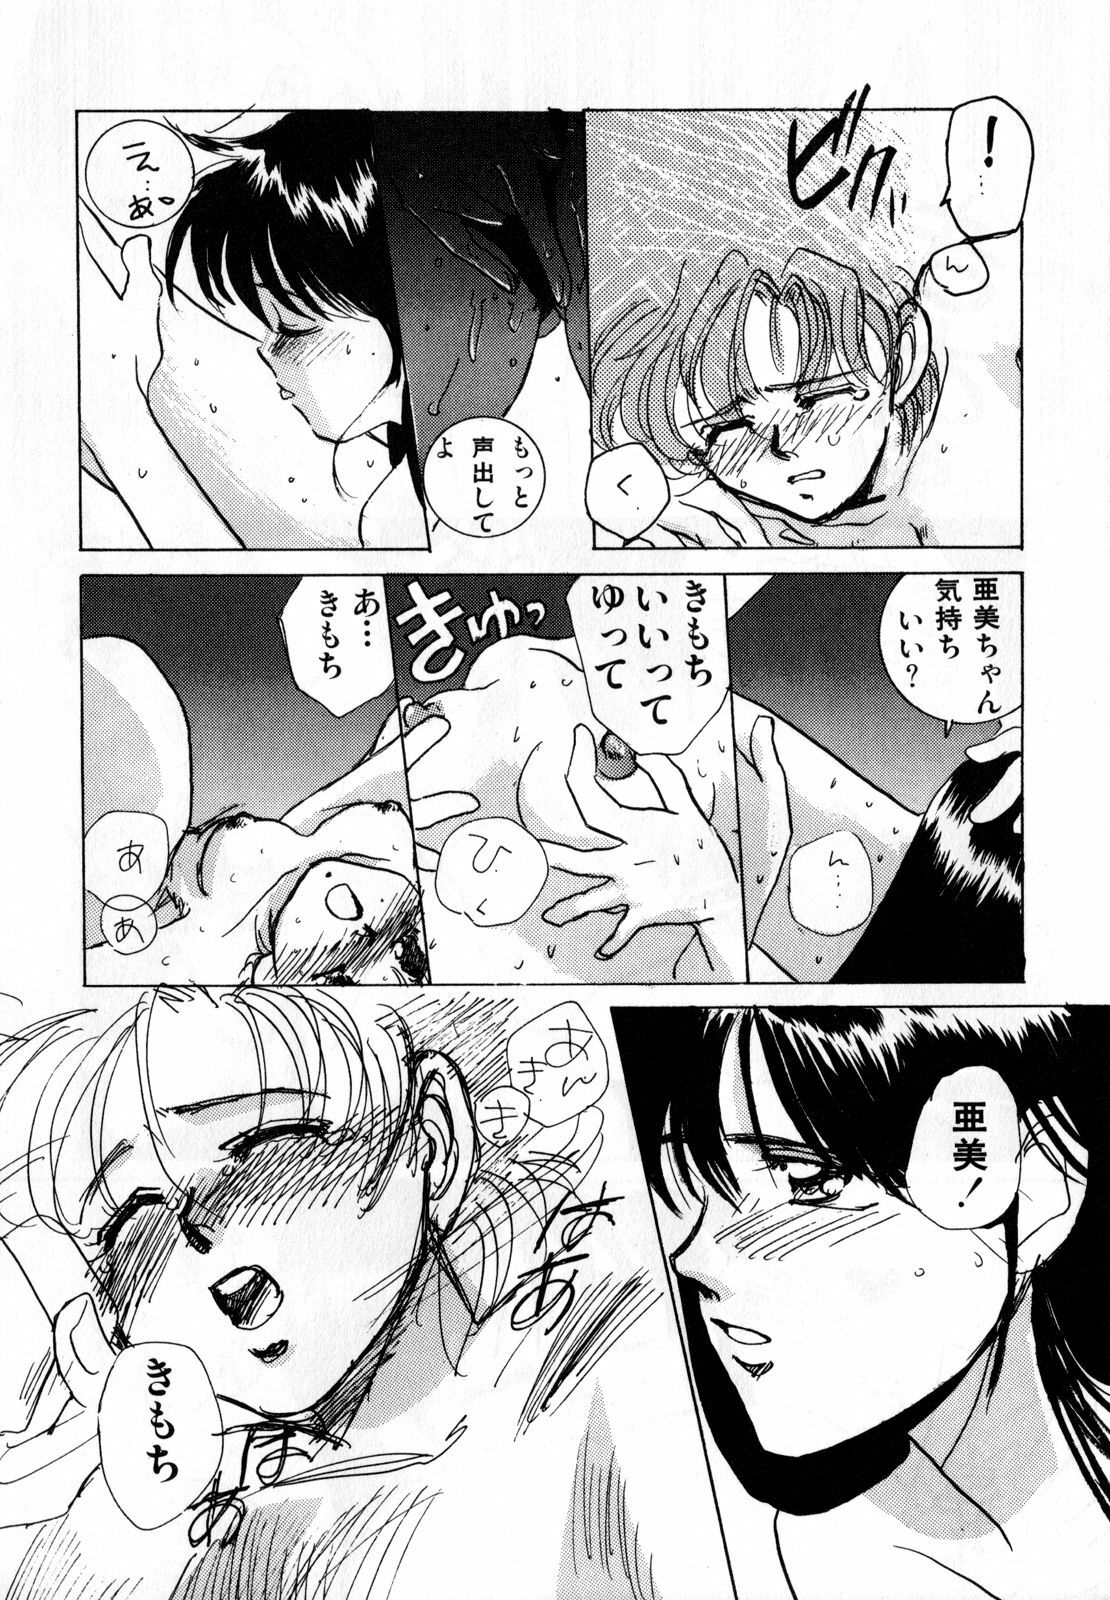 [Anthology] Lunatic Party 1 (Sailor Moon) page 39 full